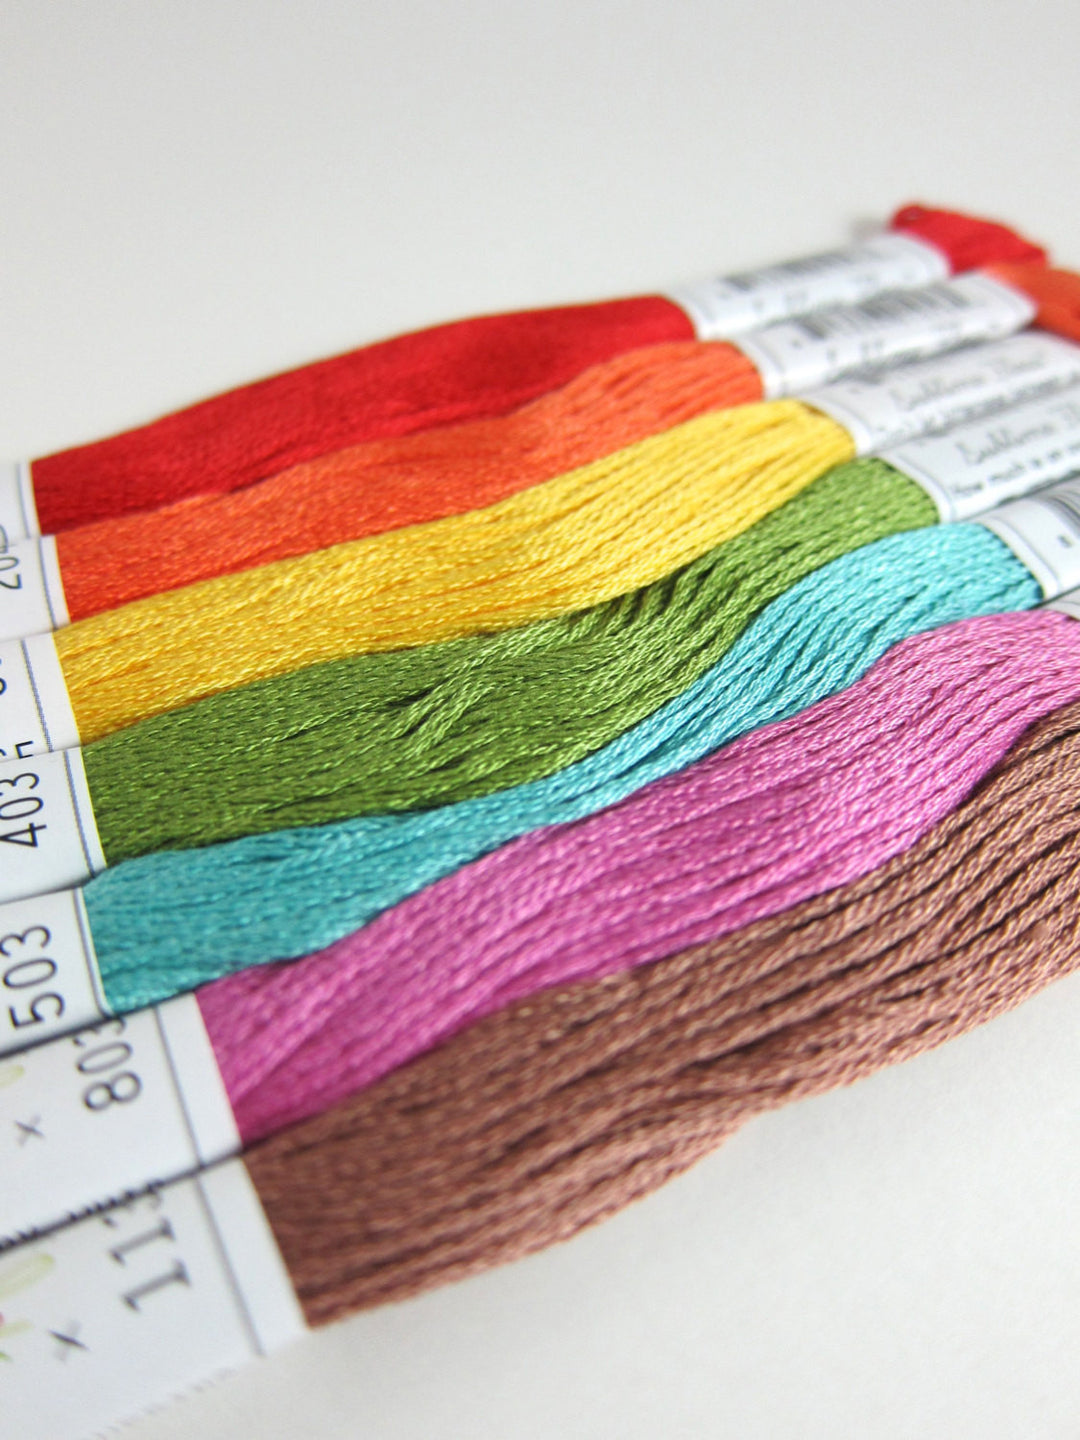 Embroidery Floss Set - Sublime Stitching Fruit Salad Palette Floss - Snuggly Monkey